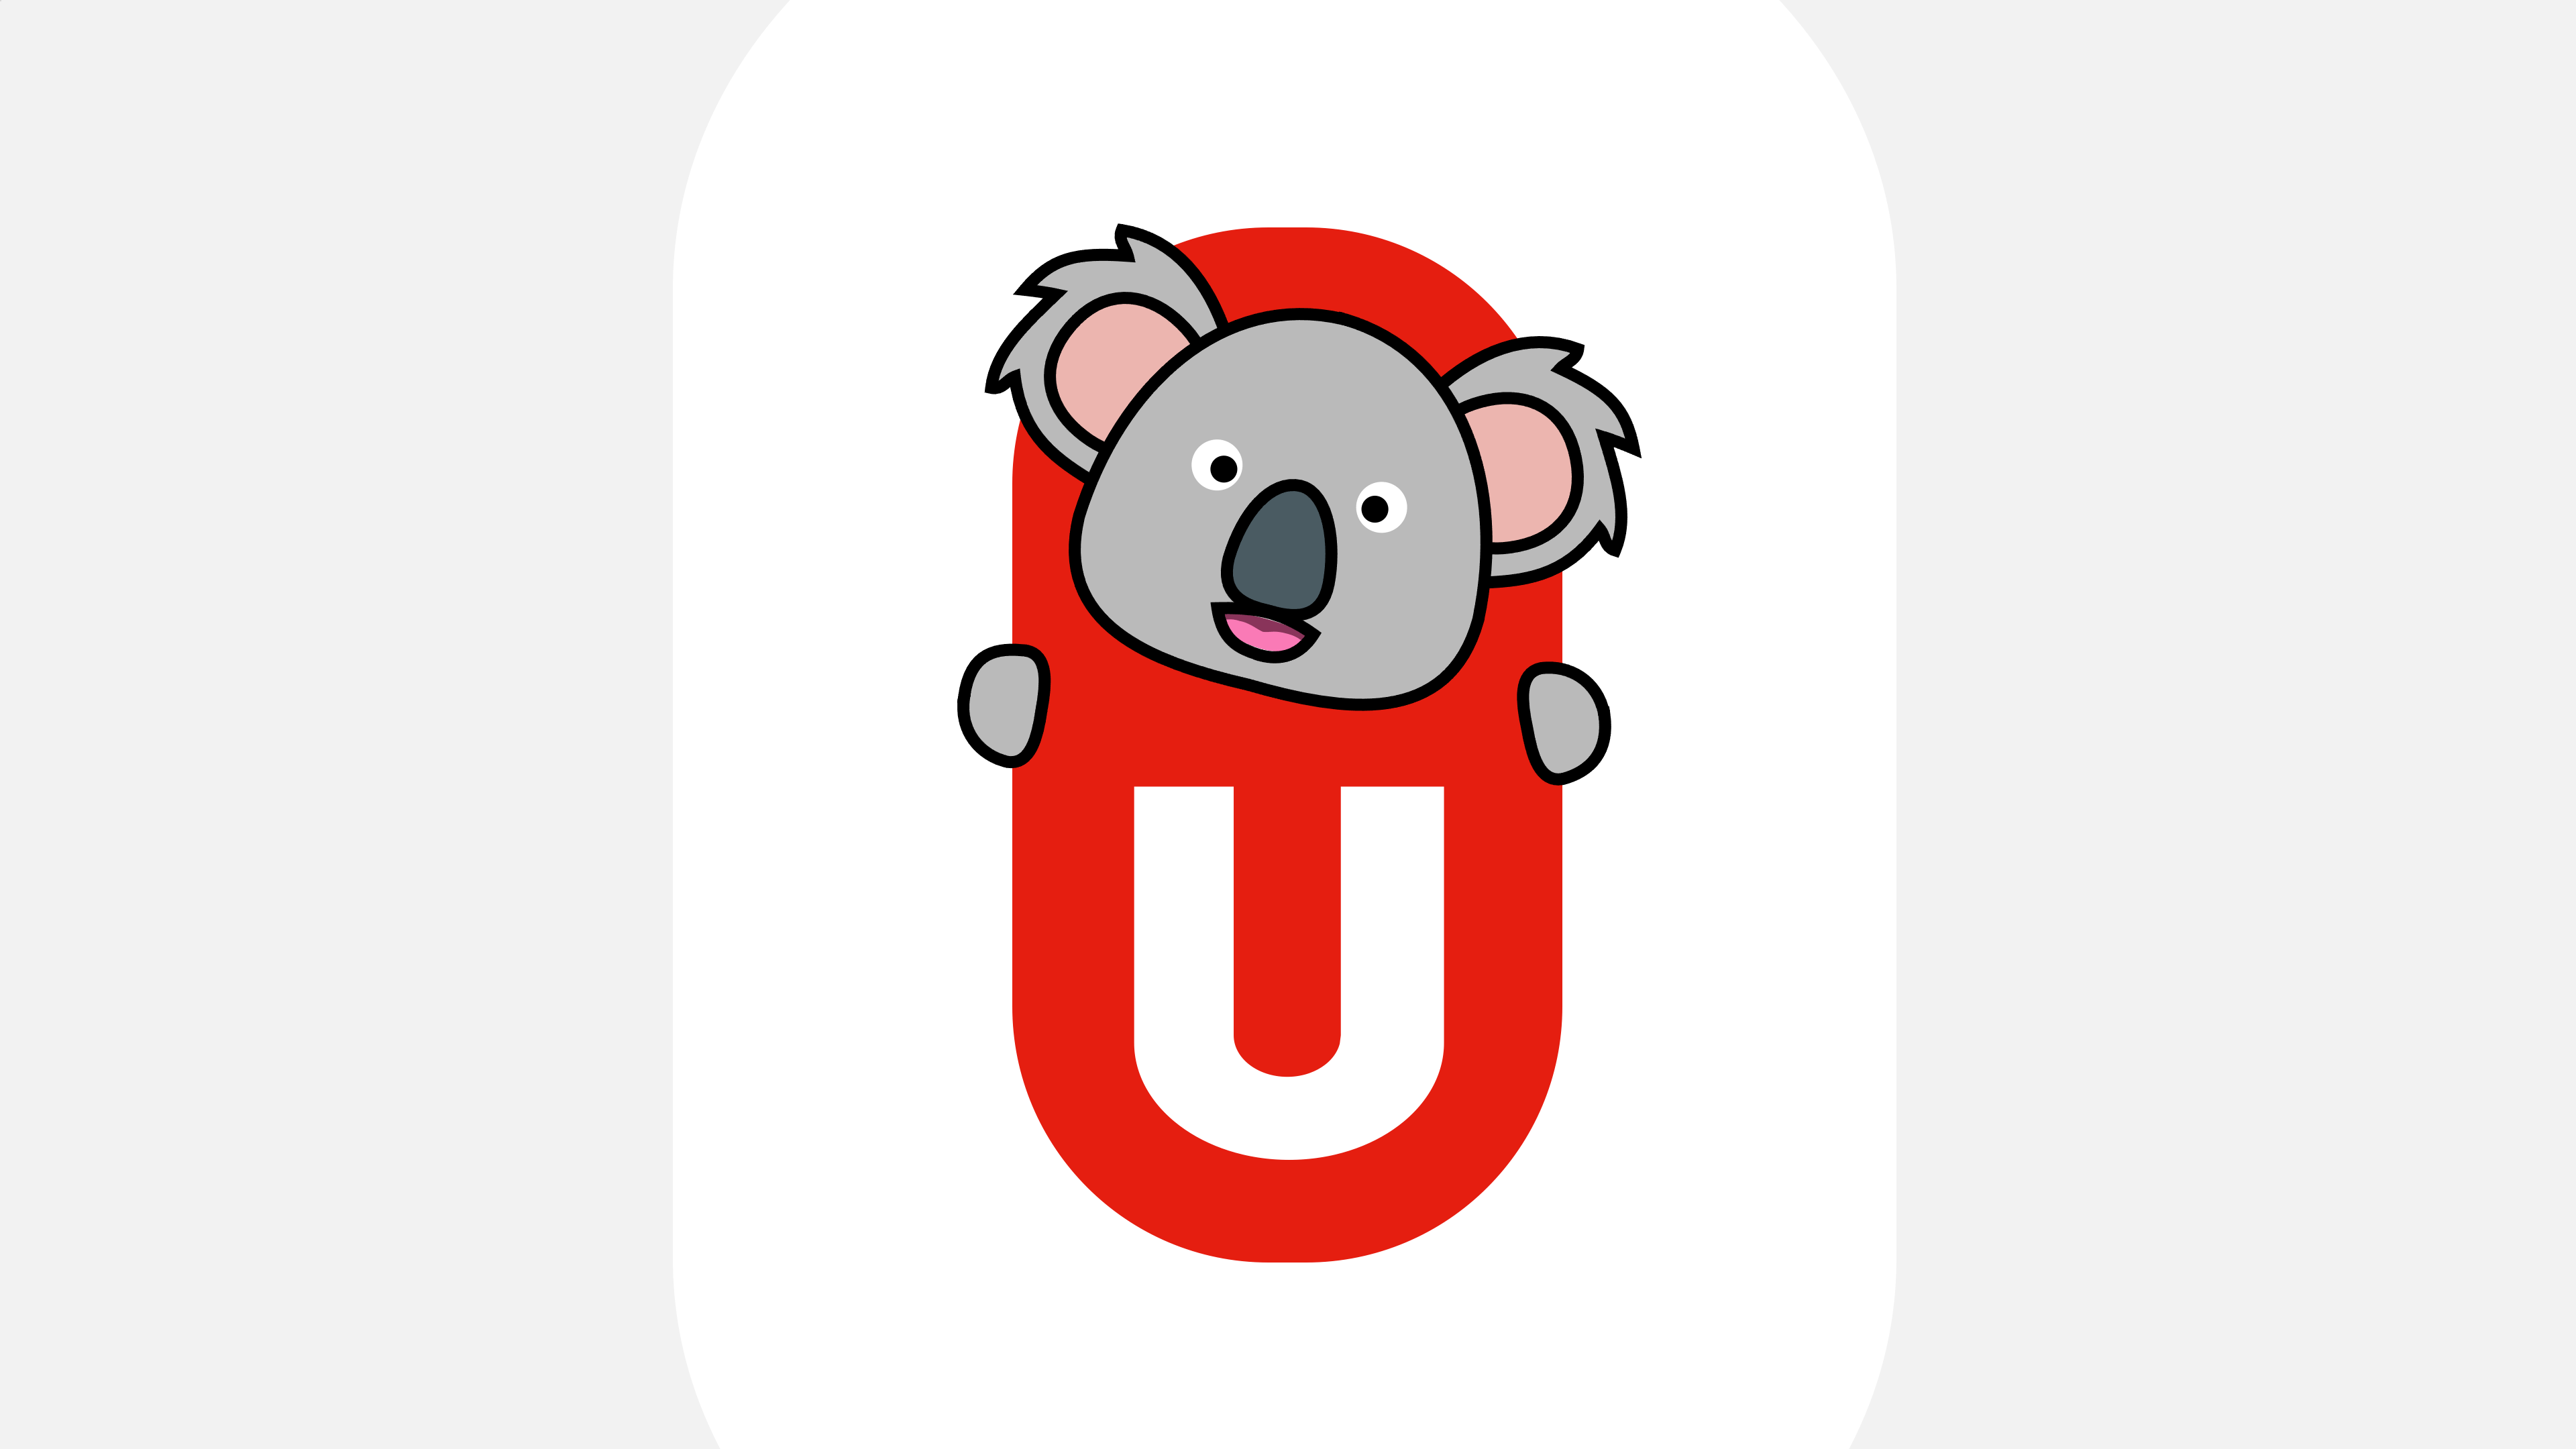 A koala hanging from the Open University of the Netherlands logo